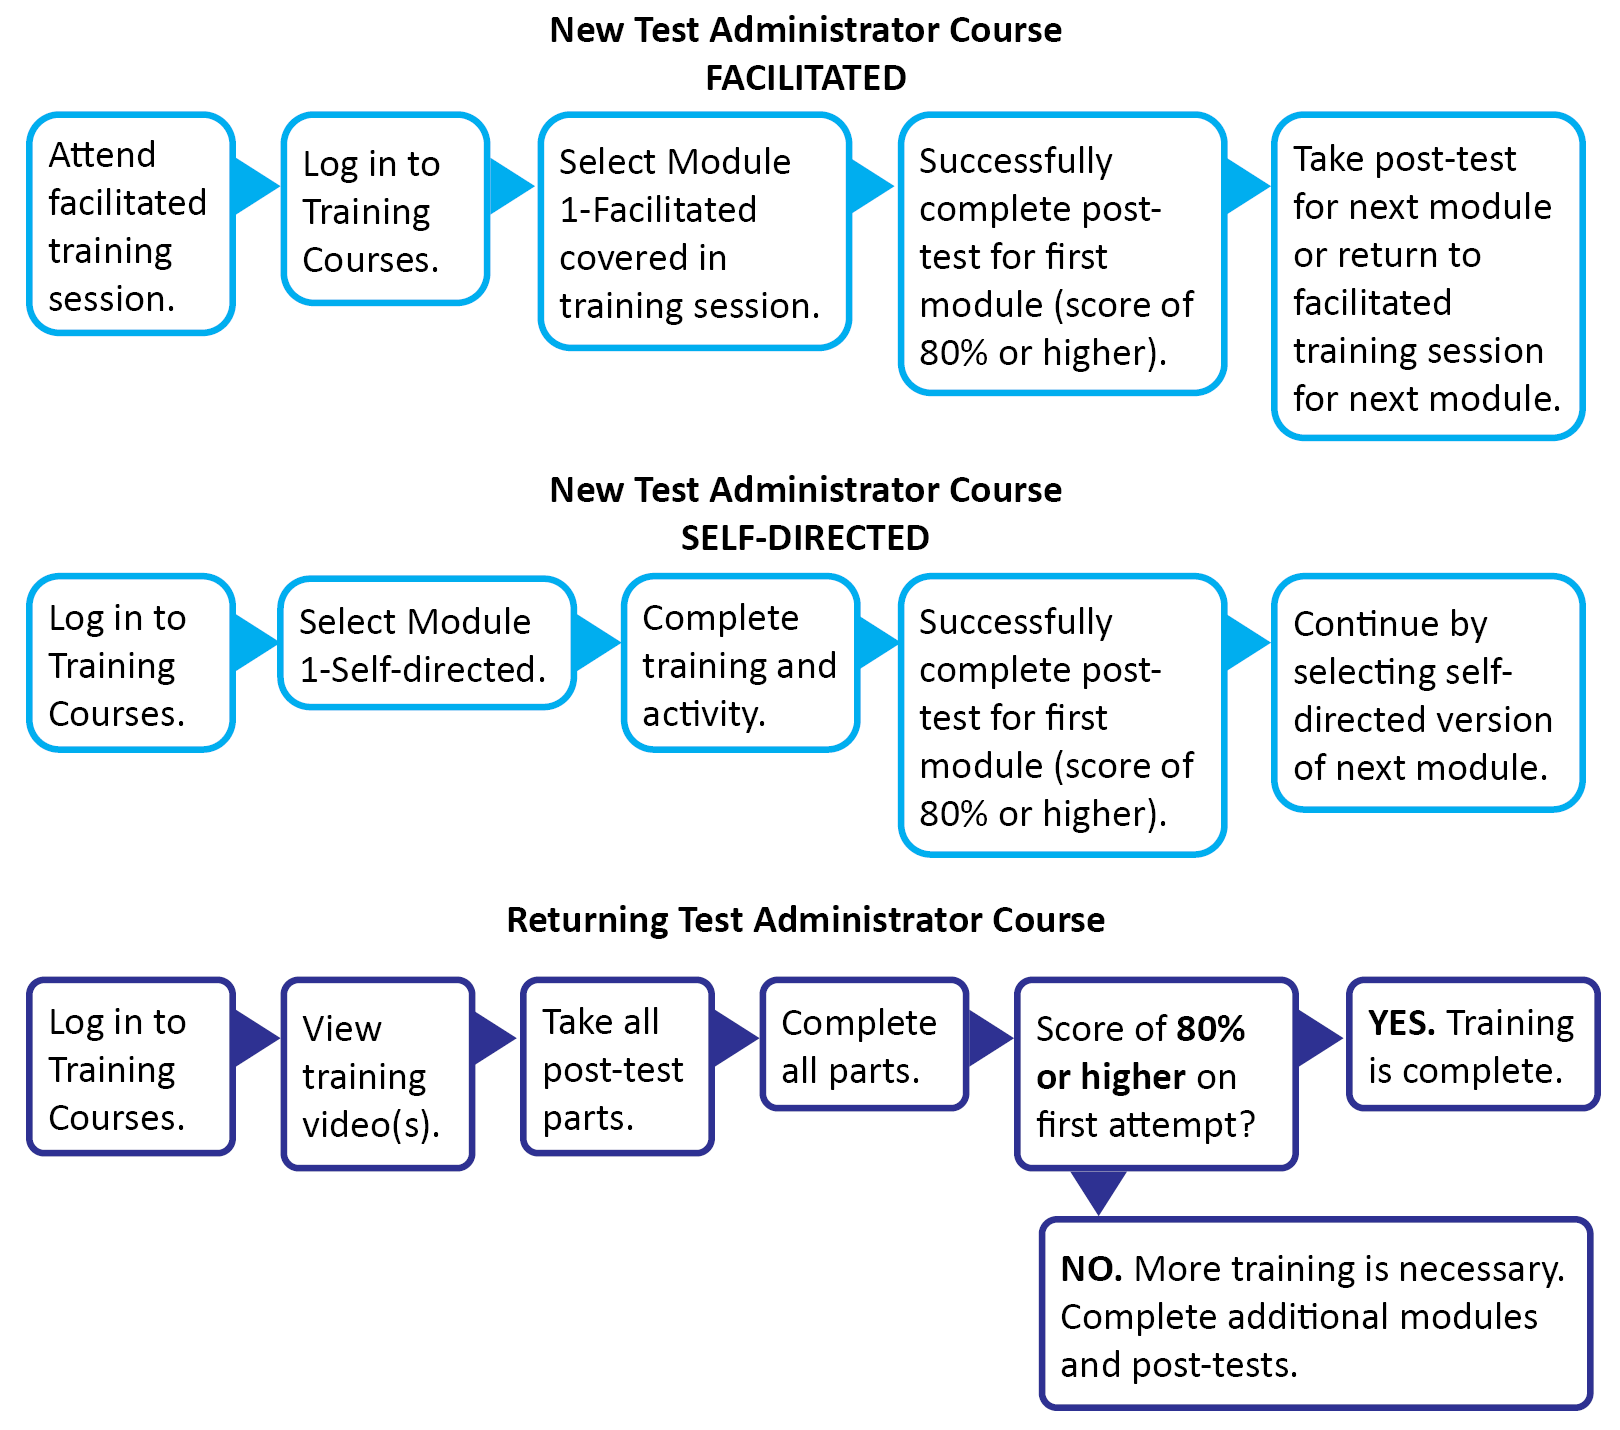 Table showing the process flow of self-directed, facilitated, and returning test administrator courses.